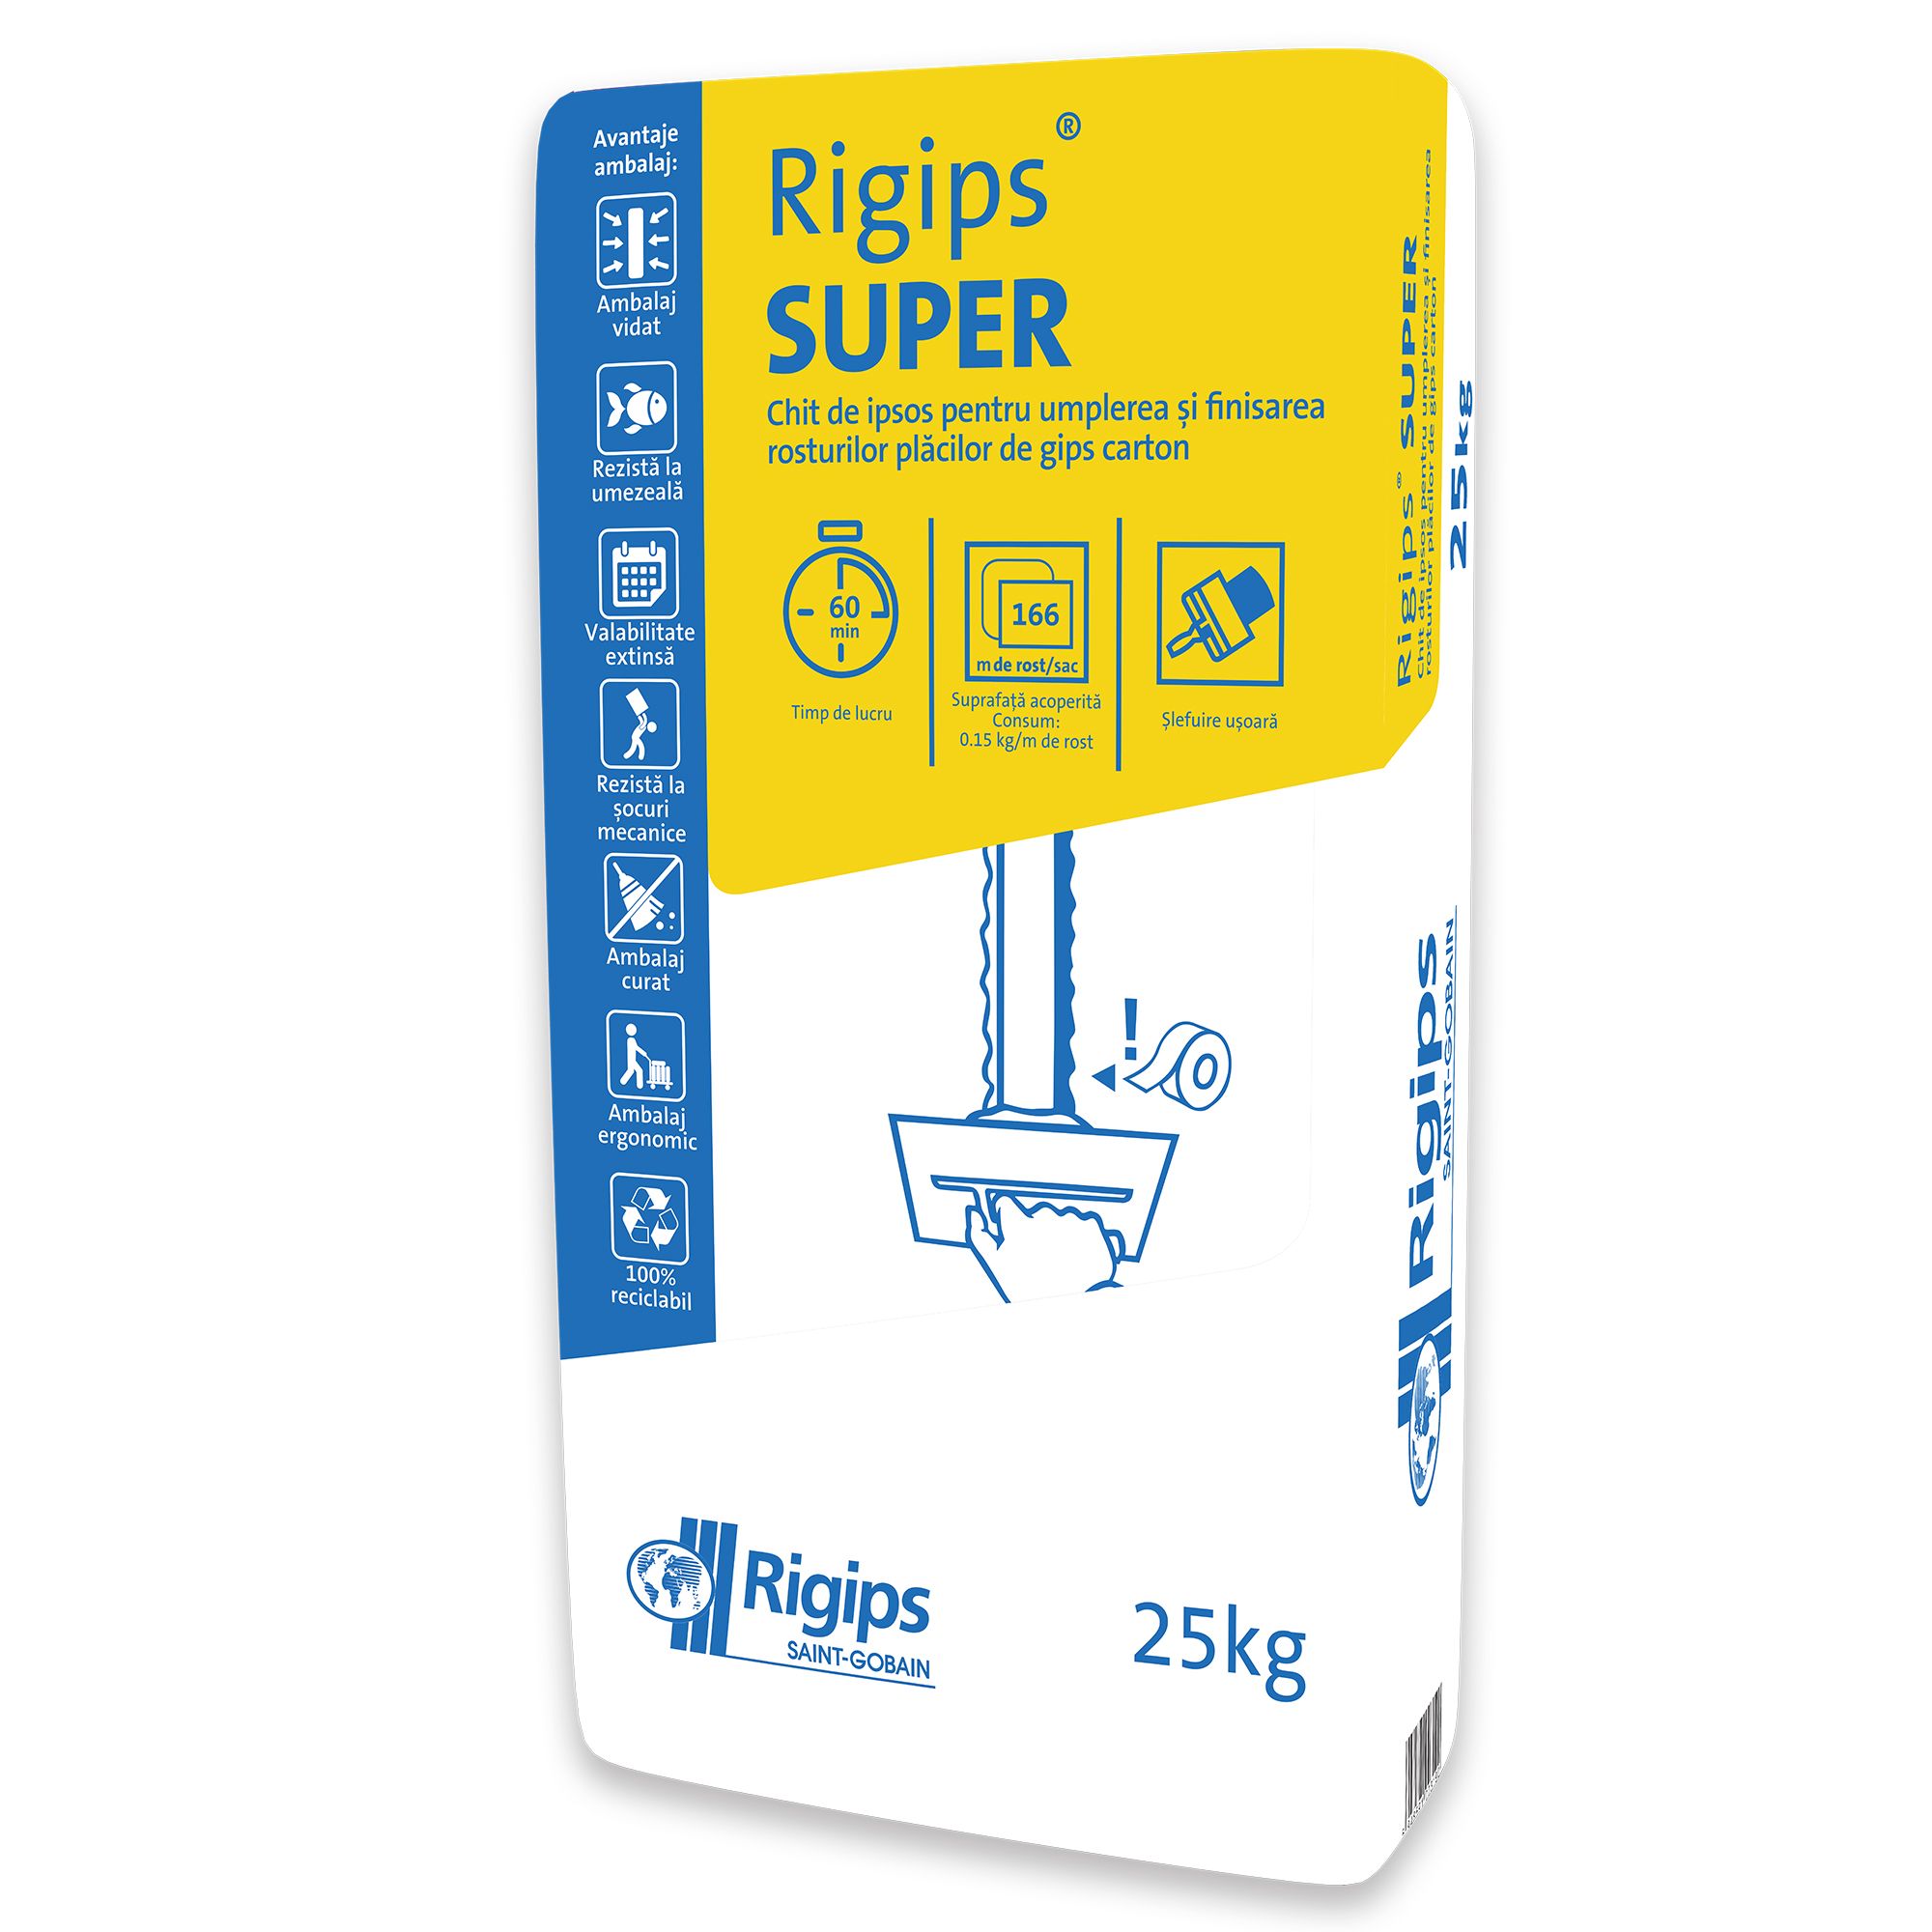 Grout joints for plasterboard - Rigips Super 25KG joint putty, https:maxbau.ro